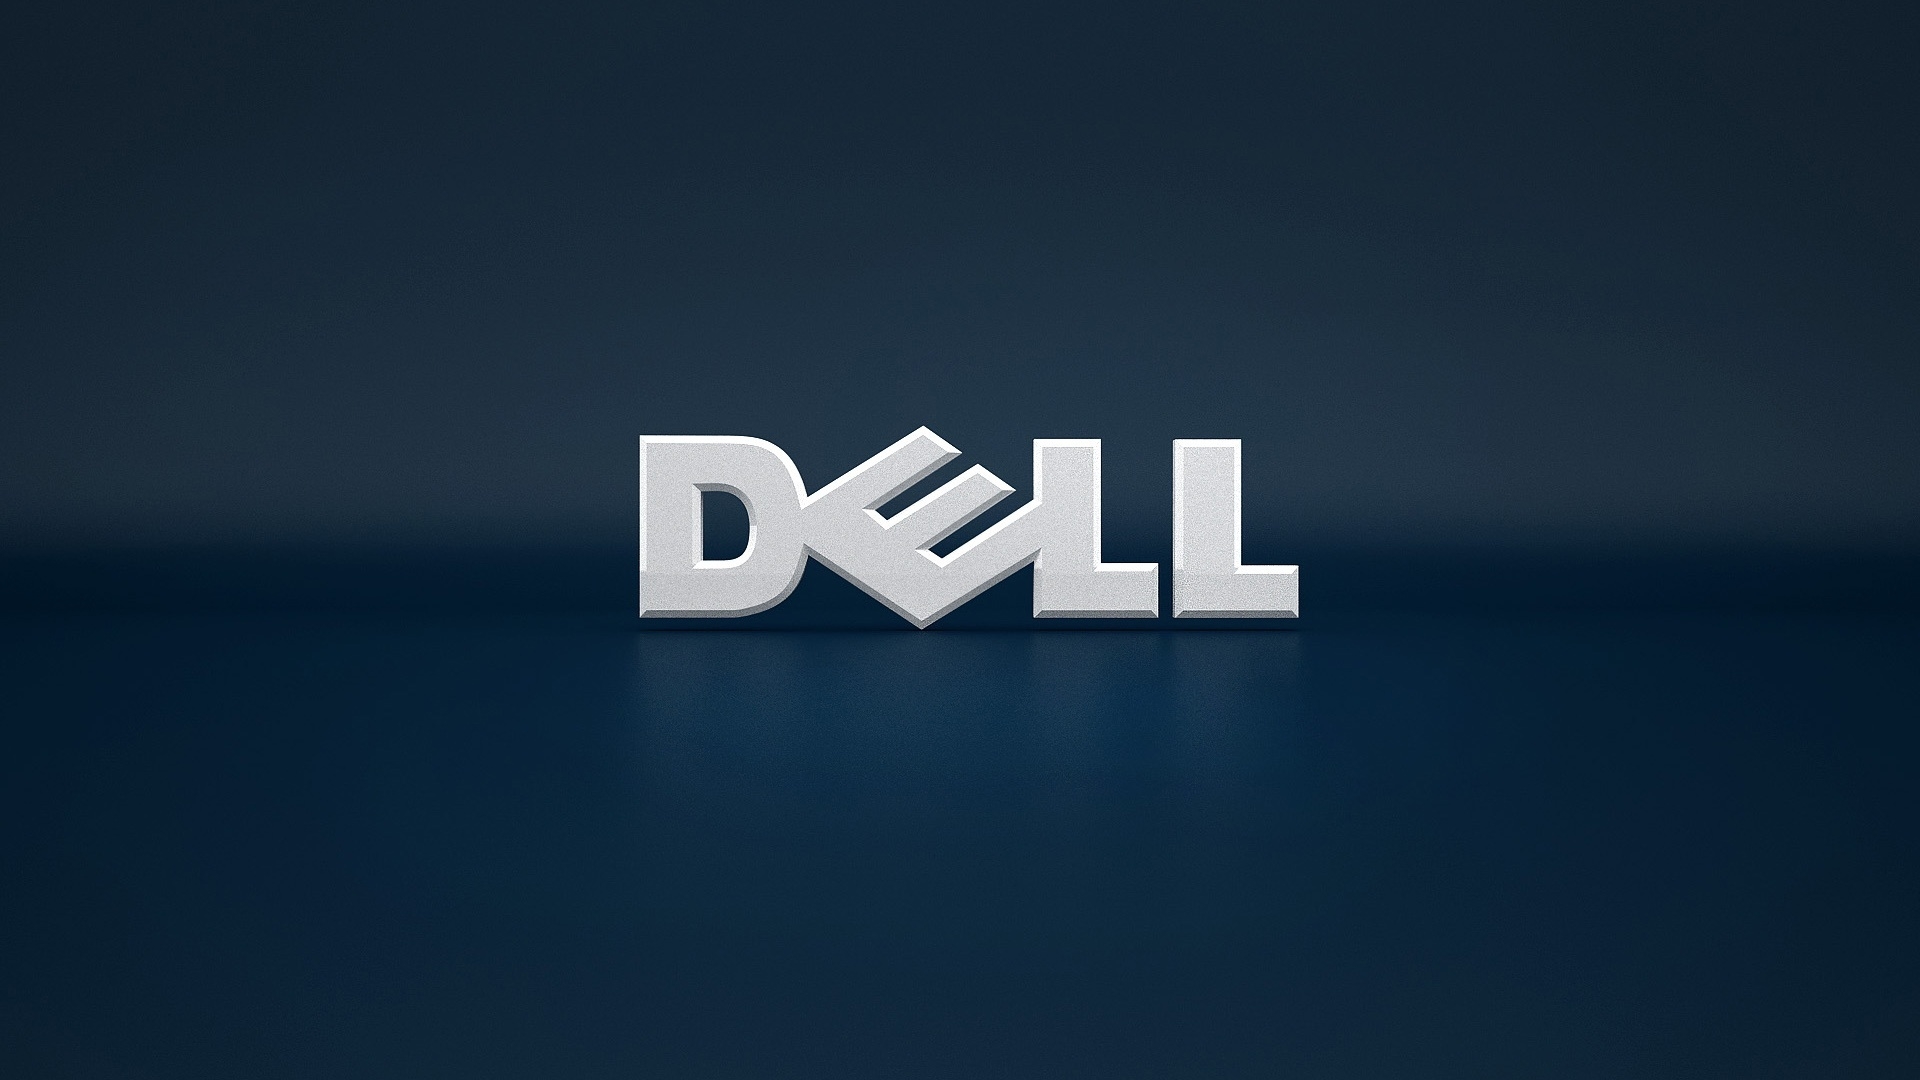 Dell blue background for 1920 x 1080 HDTV 1080p resolution